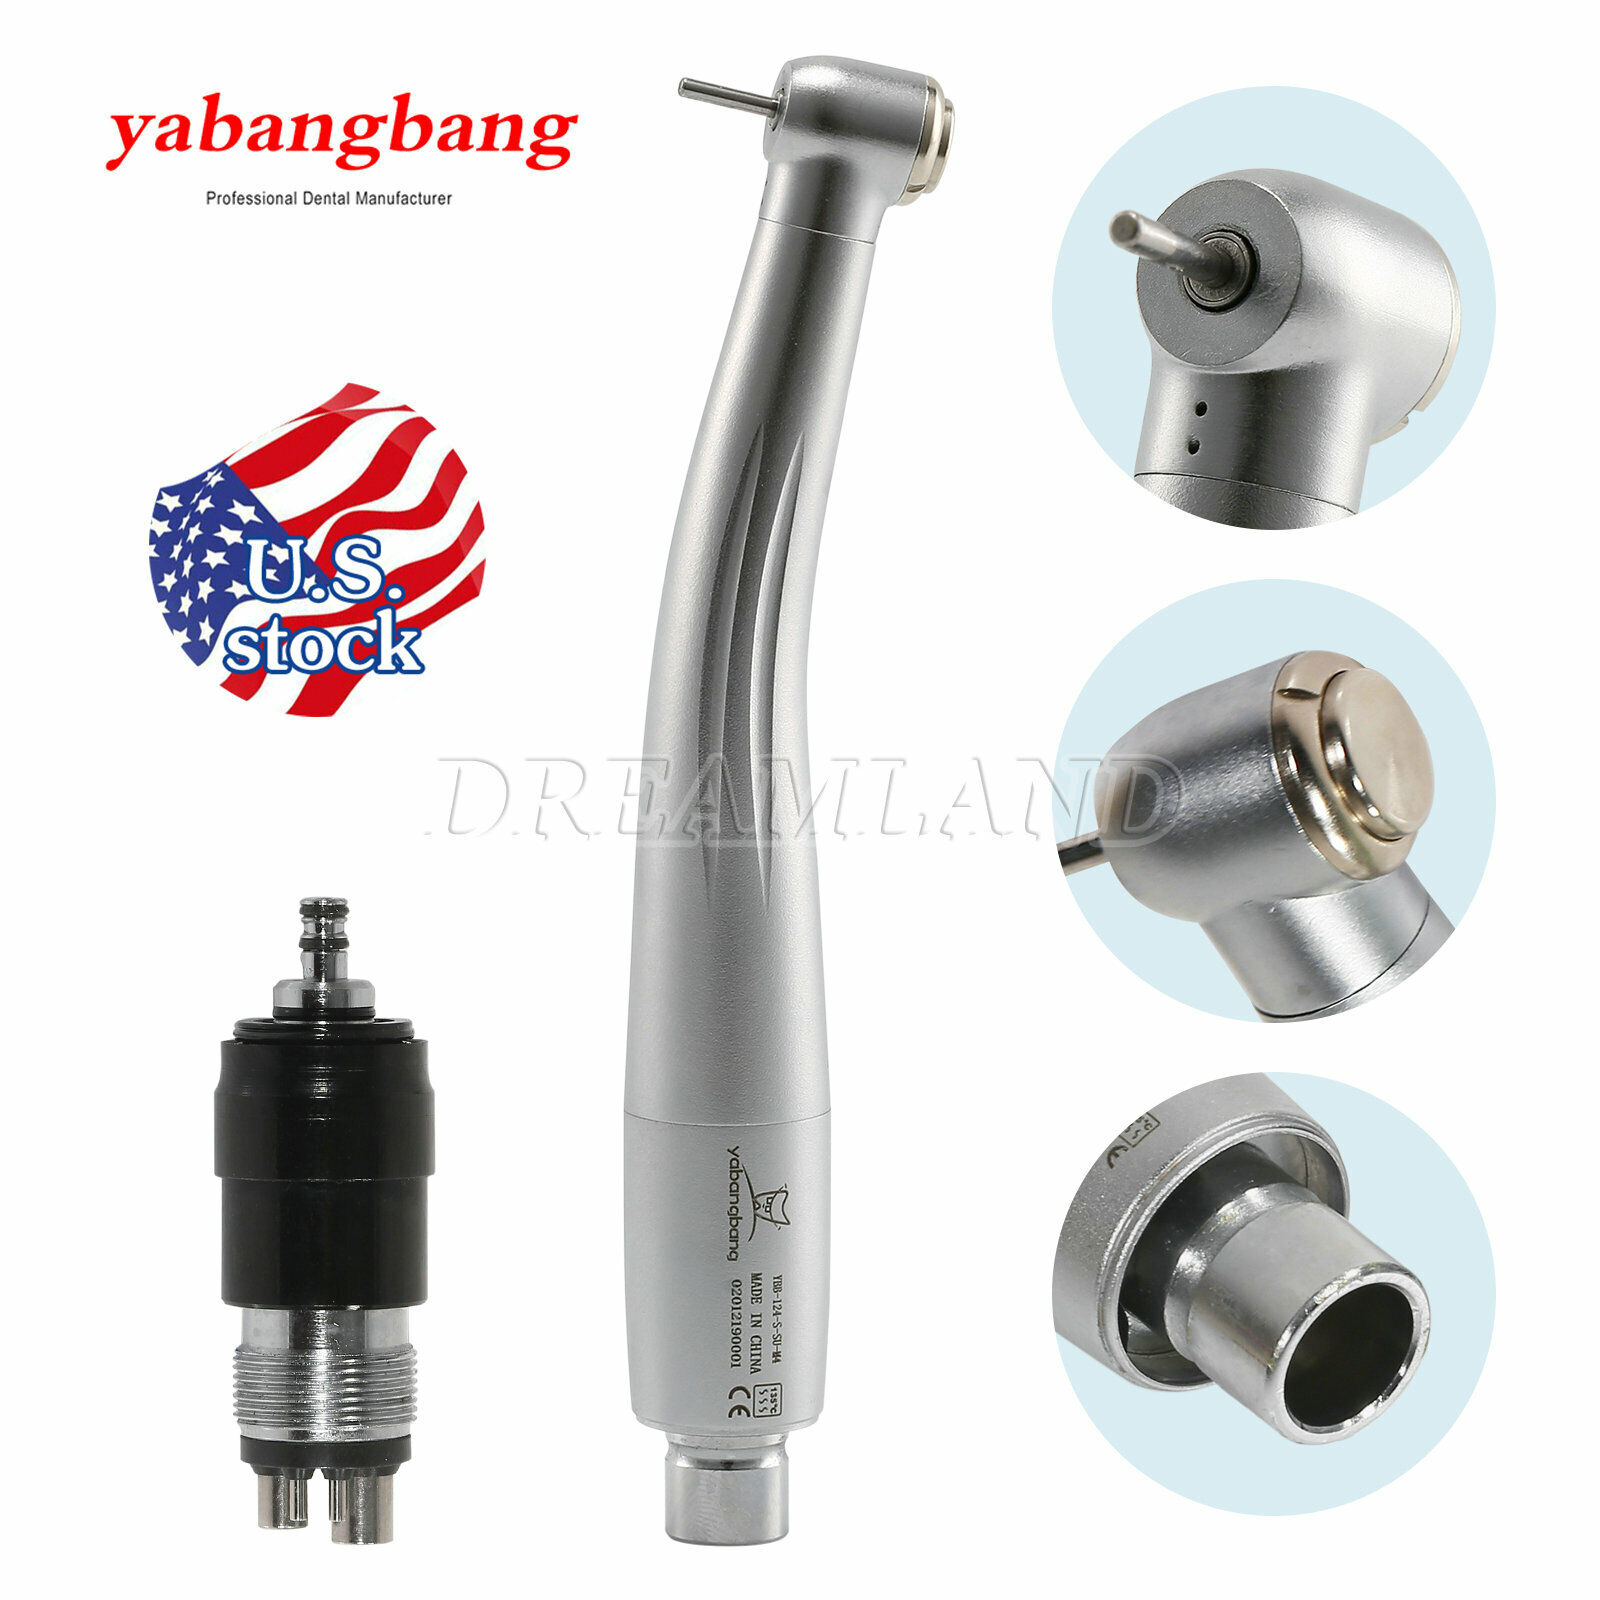 USA Dental High Speed Handpiece with Quick Coupler Coupling 4 Hole FDA z